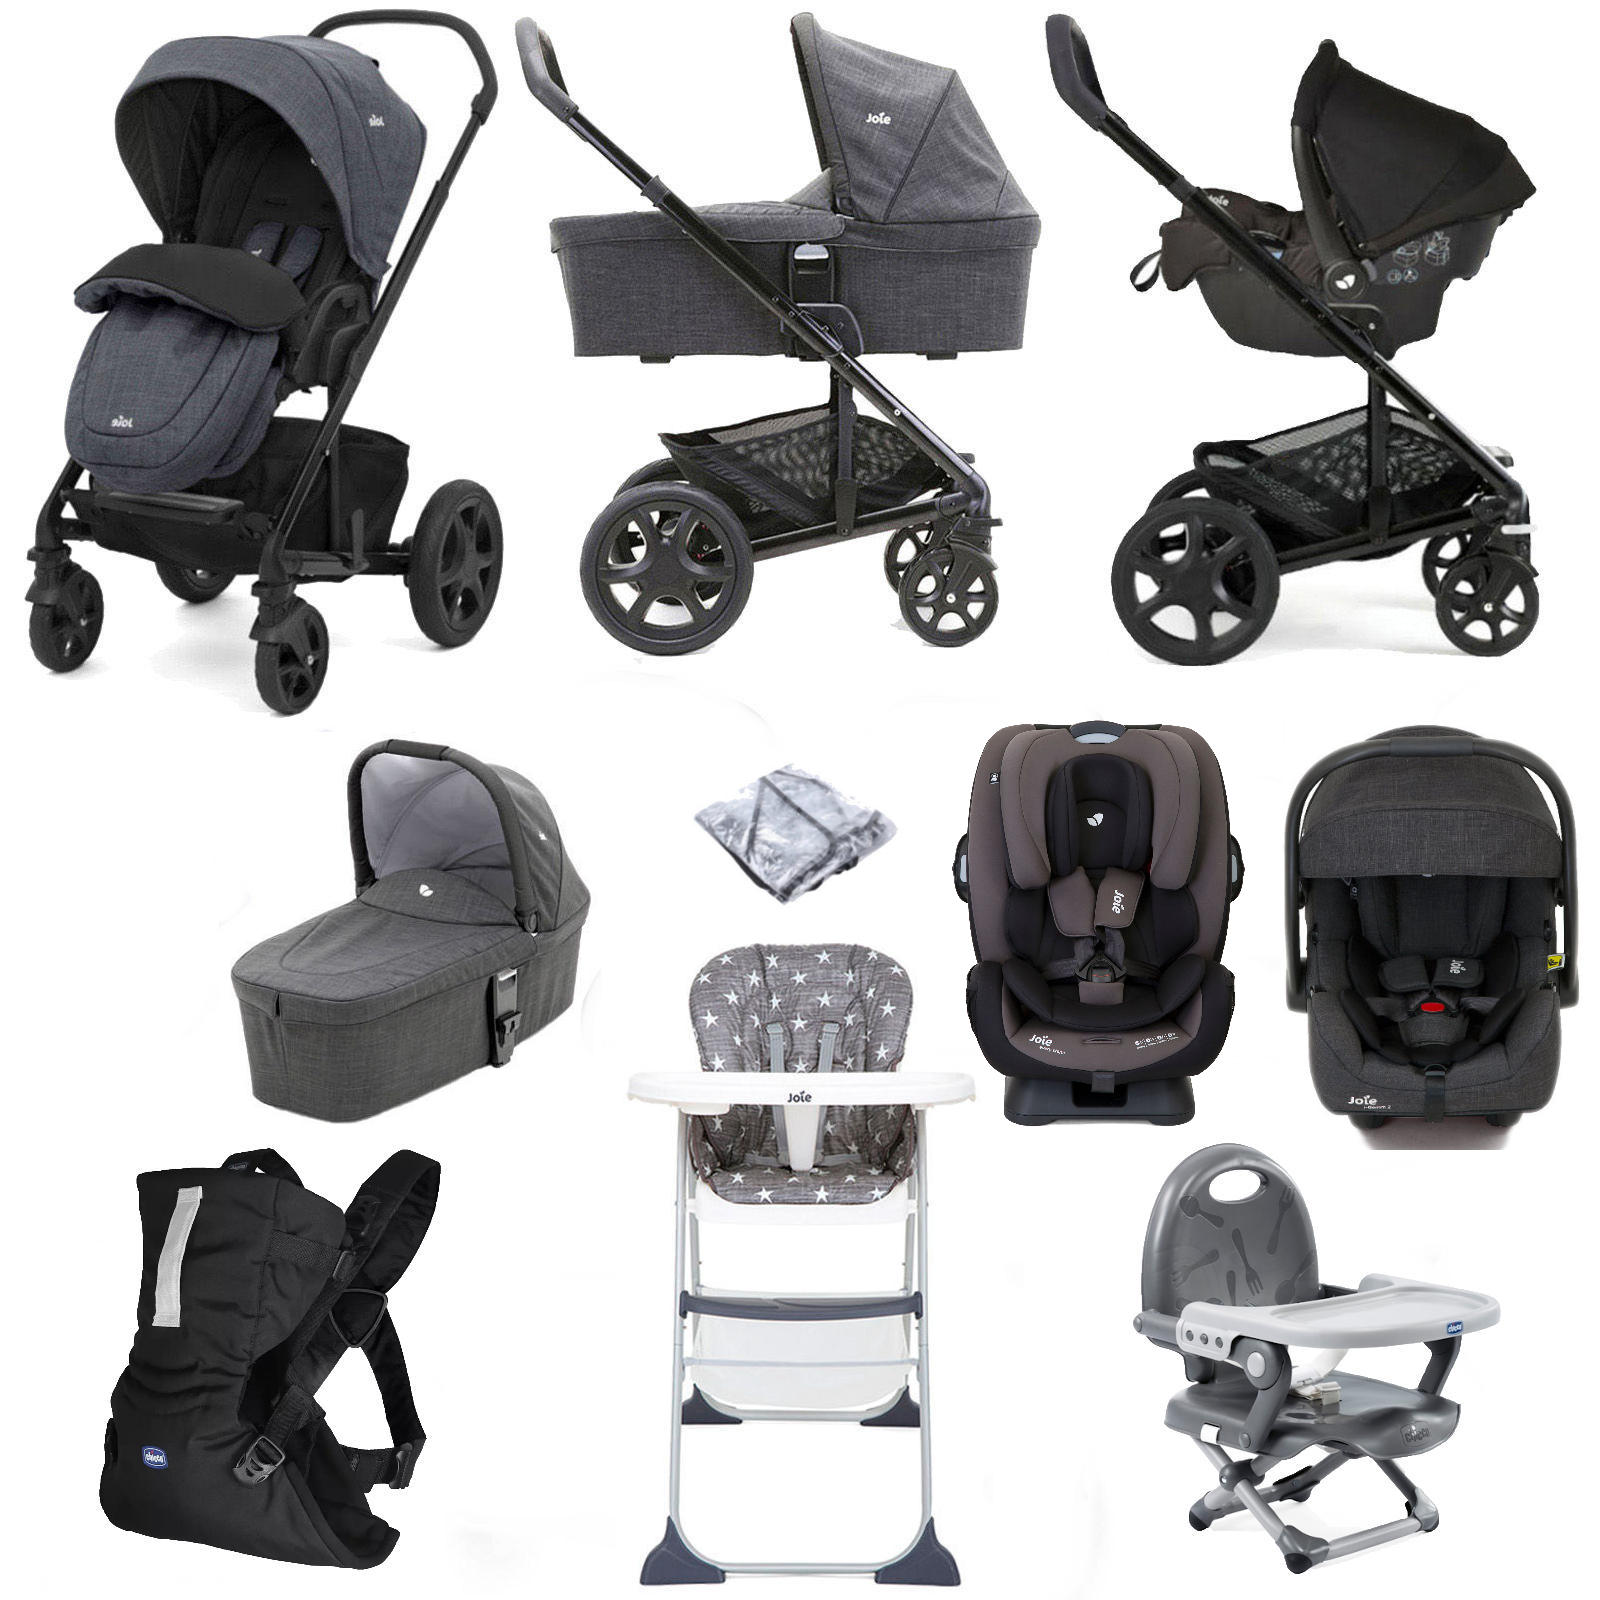 Joie Chrome DLX (i-Gemm2 & Every Stage Car Seat) Everything You Need Travel System Bundle with Carrycot - Pavement